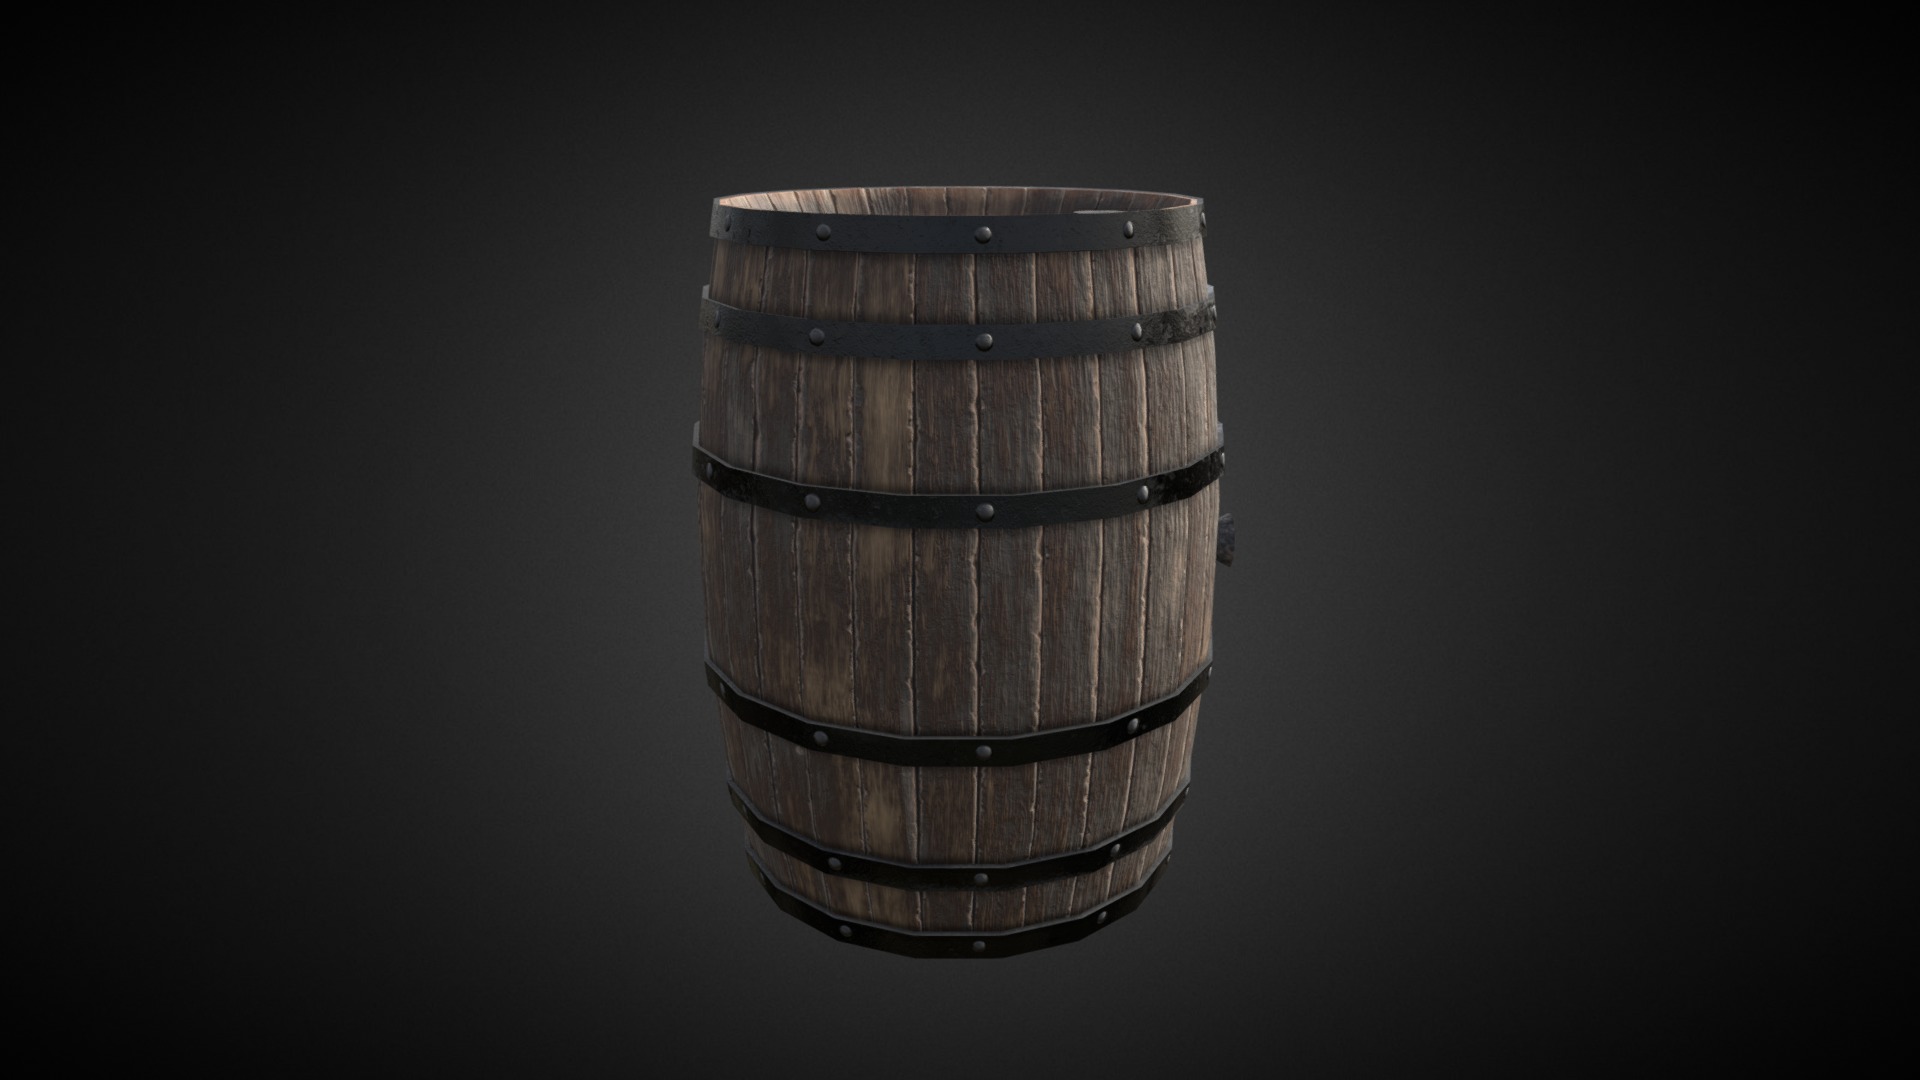 3D model Common Barrel - This is a 3D model of the Common Barrel. The 3D model is about a barrel with a wooden top.